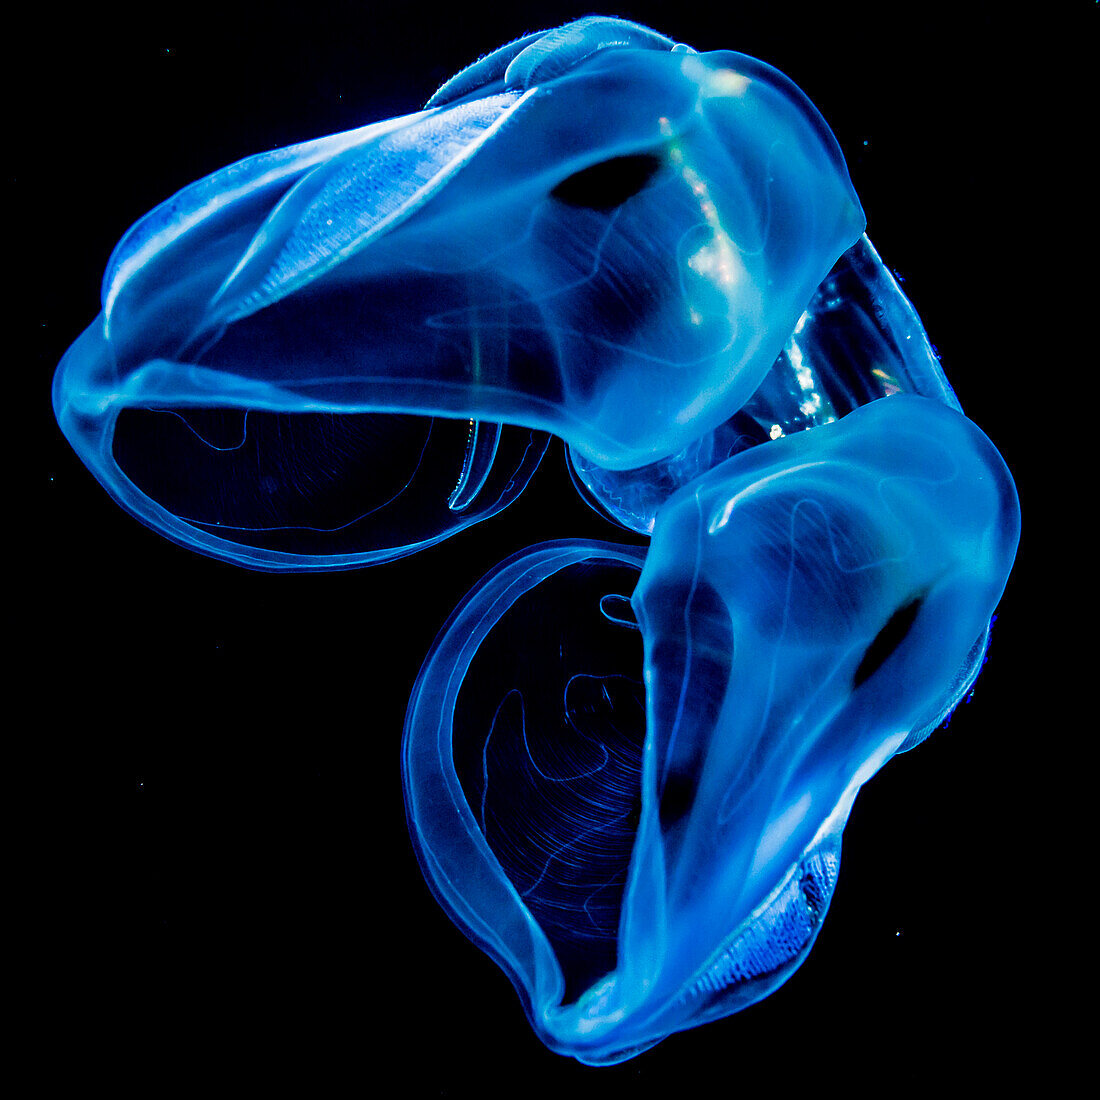 Bolinopsid comb jelly ctenophore that was photographed several miles offshore of Hawaii Island during a blackwater scuba dive, Island of Hawaii, Hawaii, United States of America